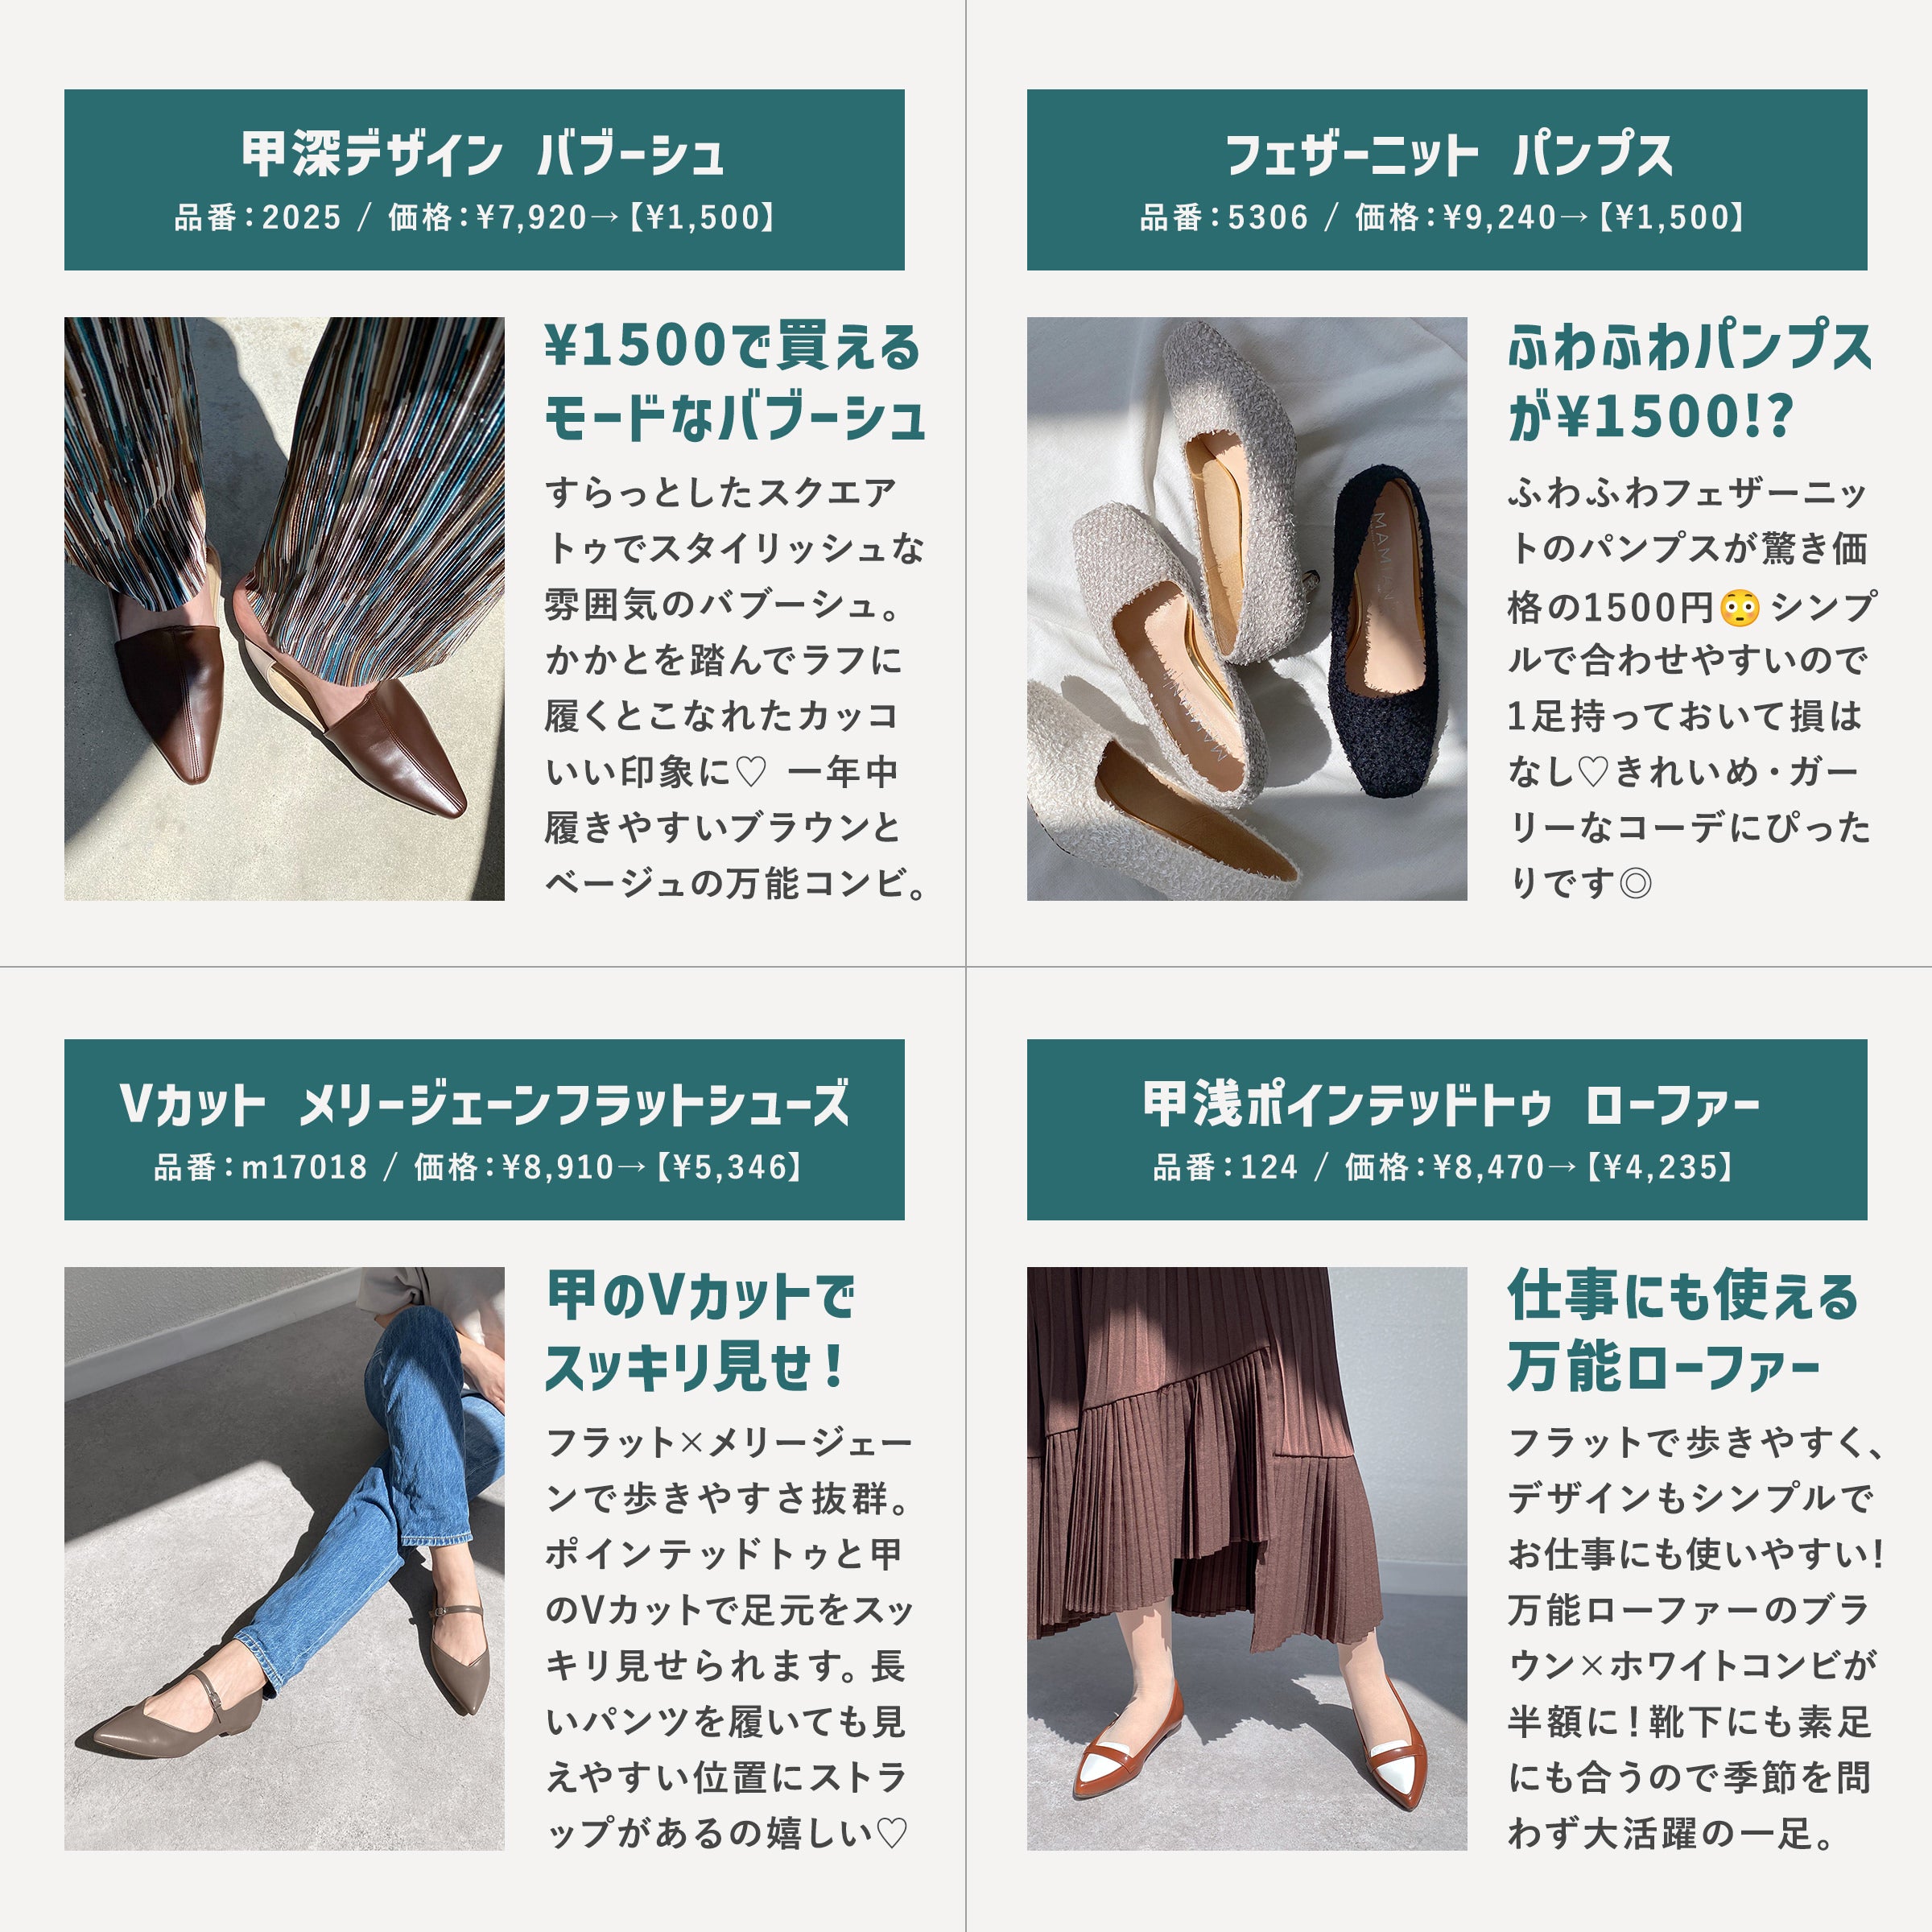 Treat yourself during the New Year holidays! Special feature on shoes you can buy for under 6,000 yen